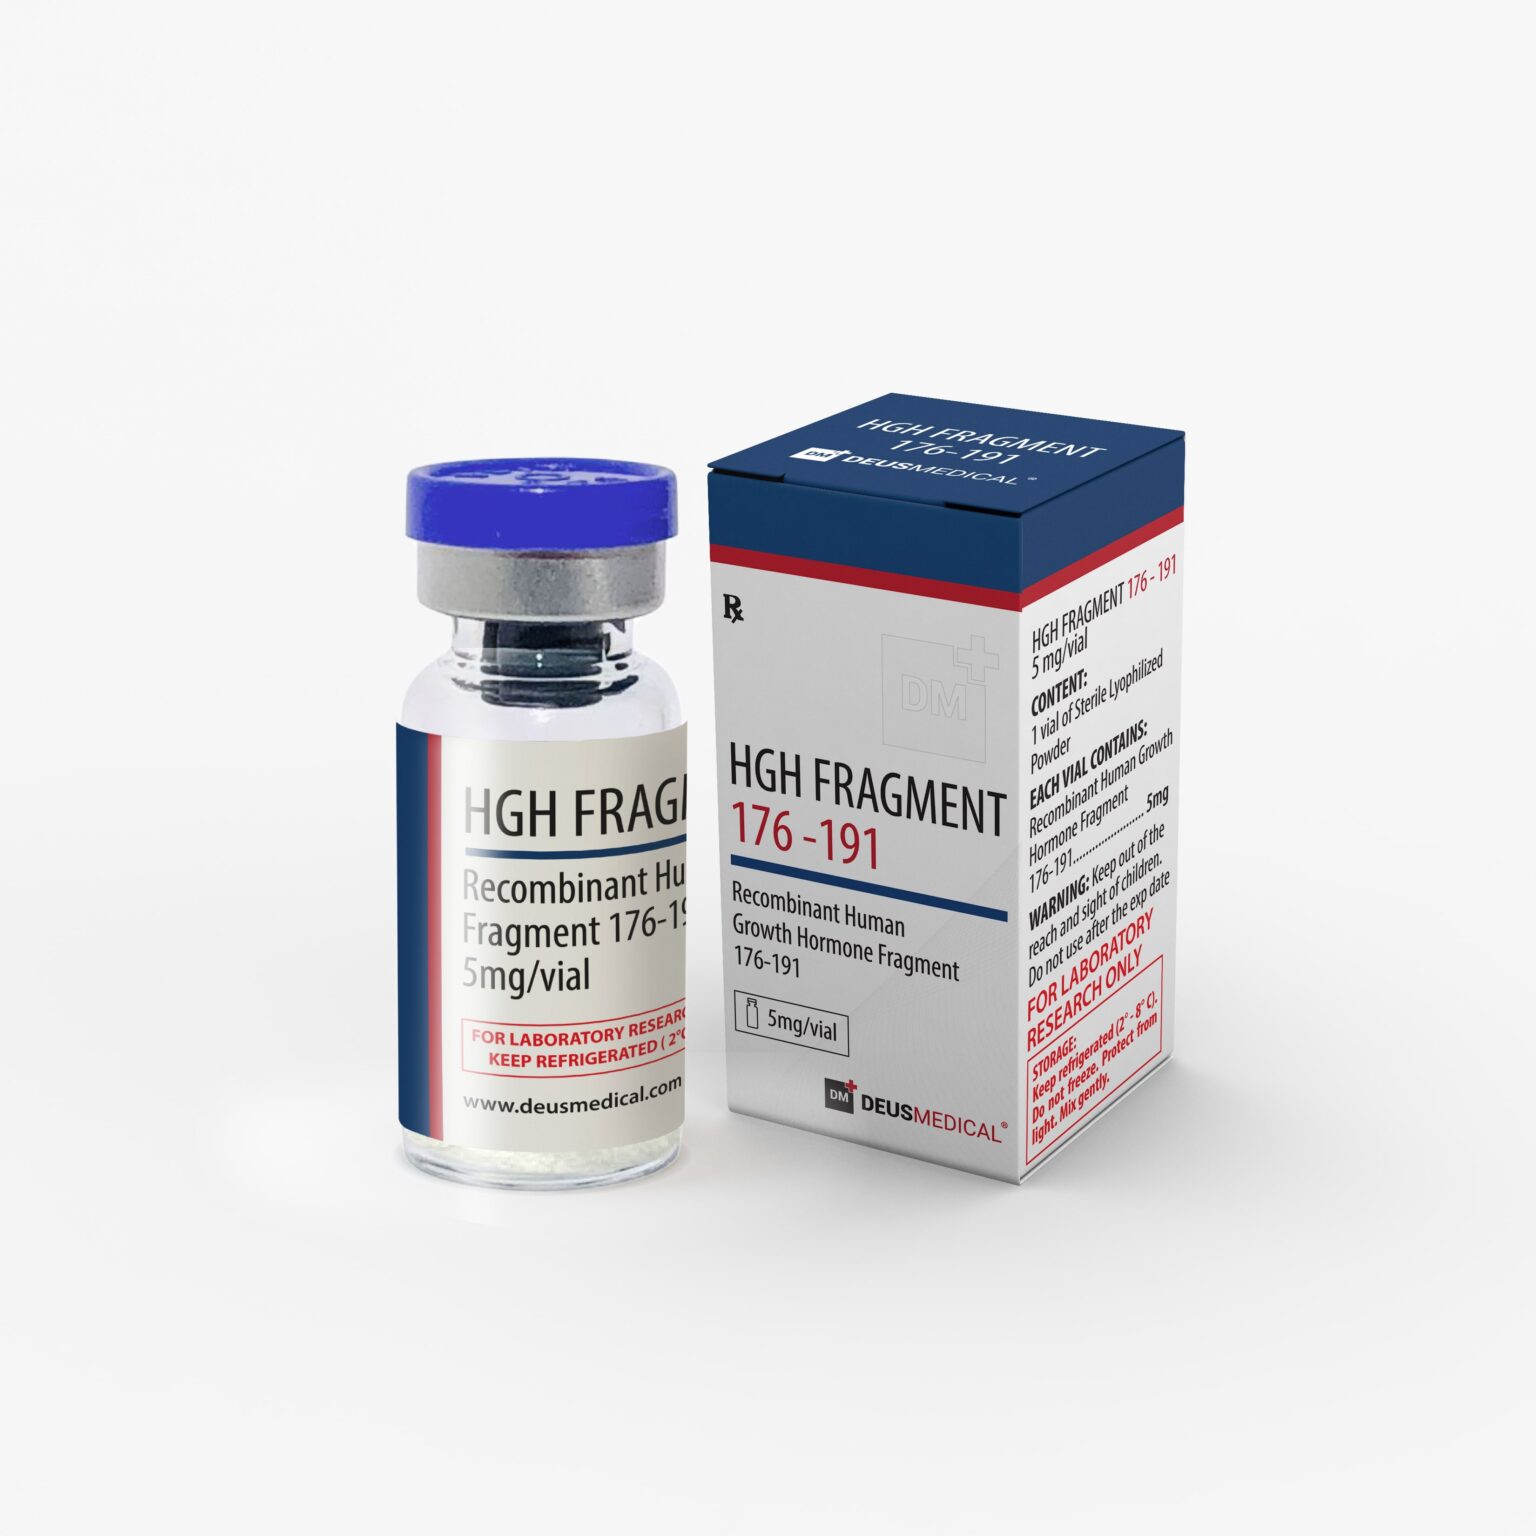 Hgh Fragment 176 191 Recombinant Human Growth Hormone Fragment 176 191